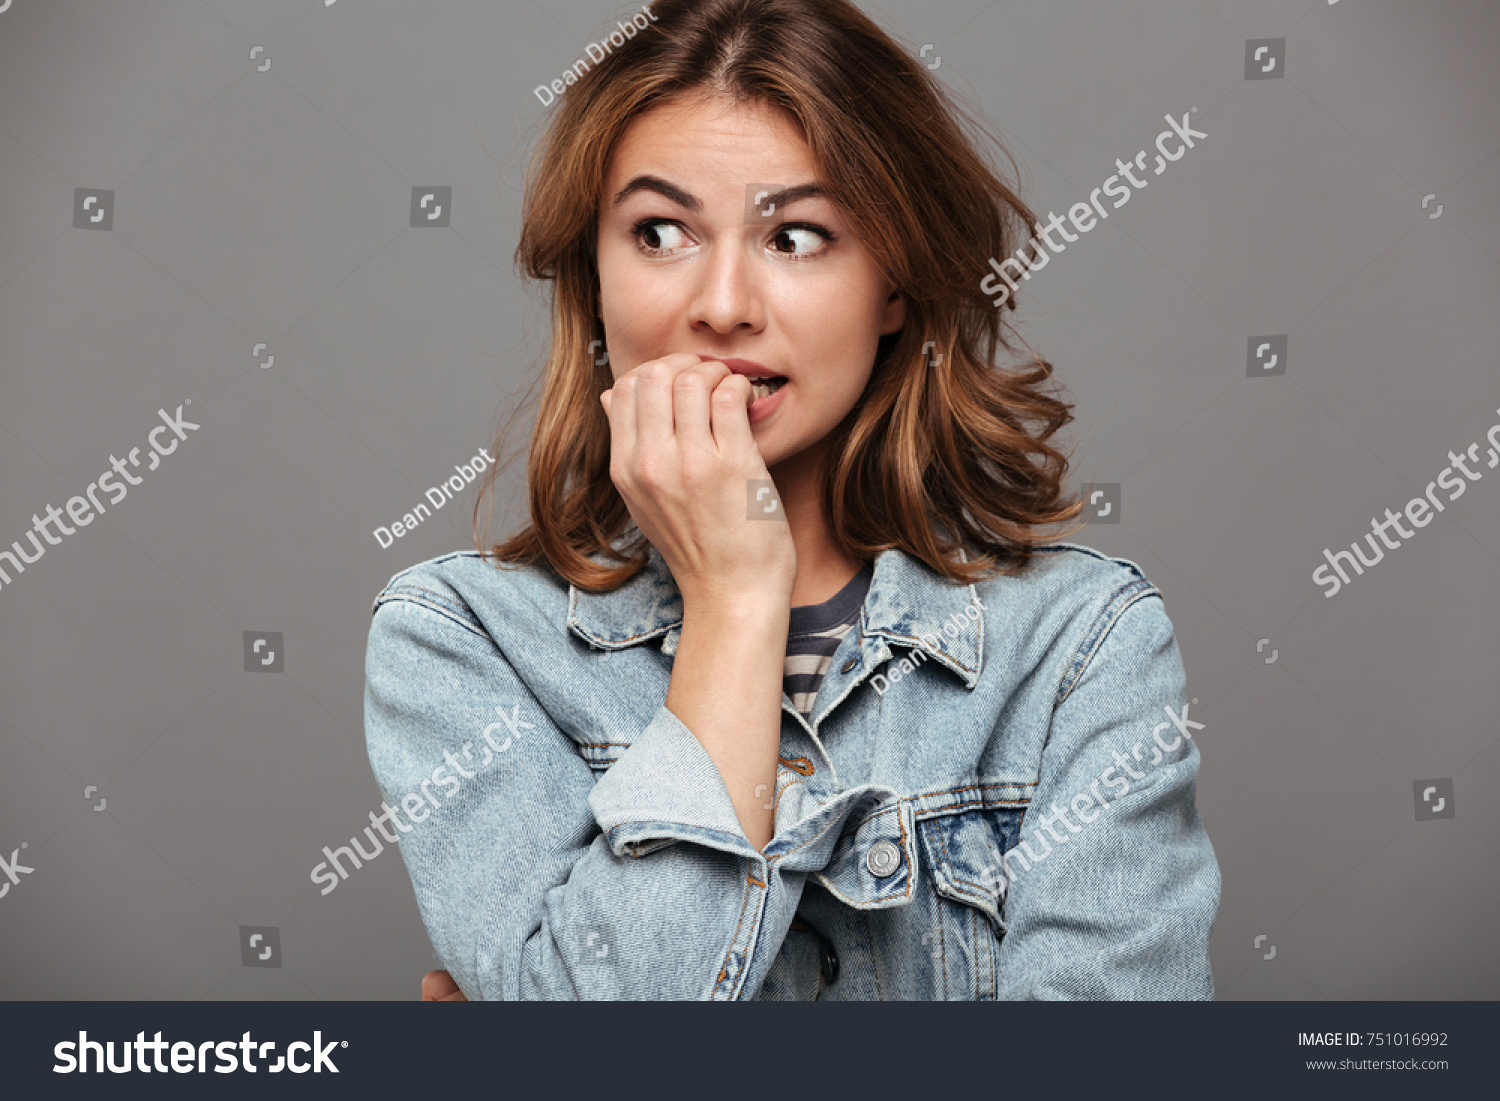 Close up portrait of a worried teenage girl in denim jacket biting her nails and looking away isolated over gray background #751016992